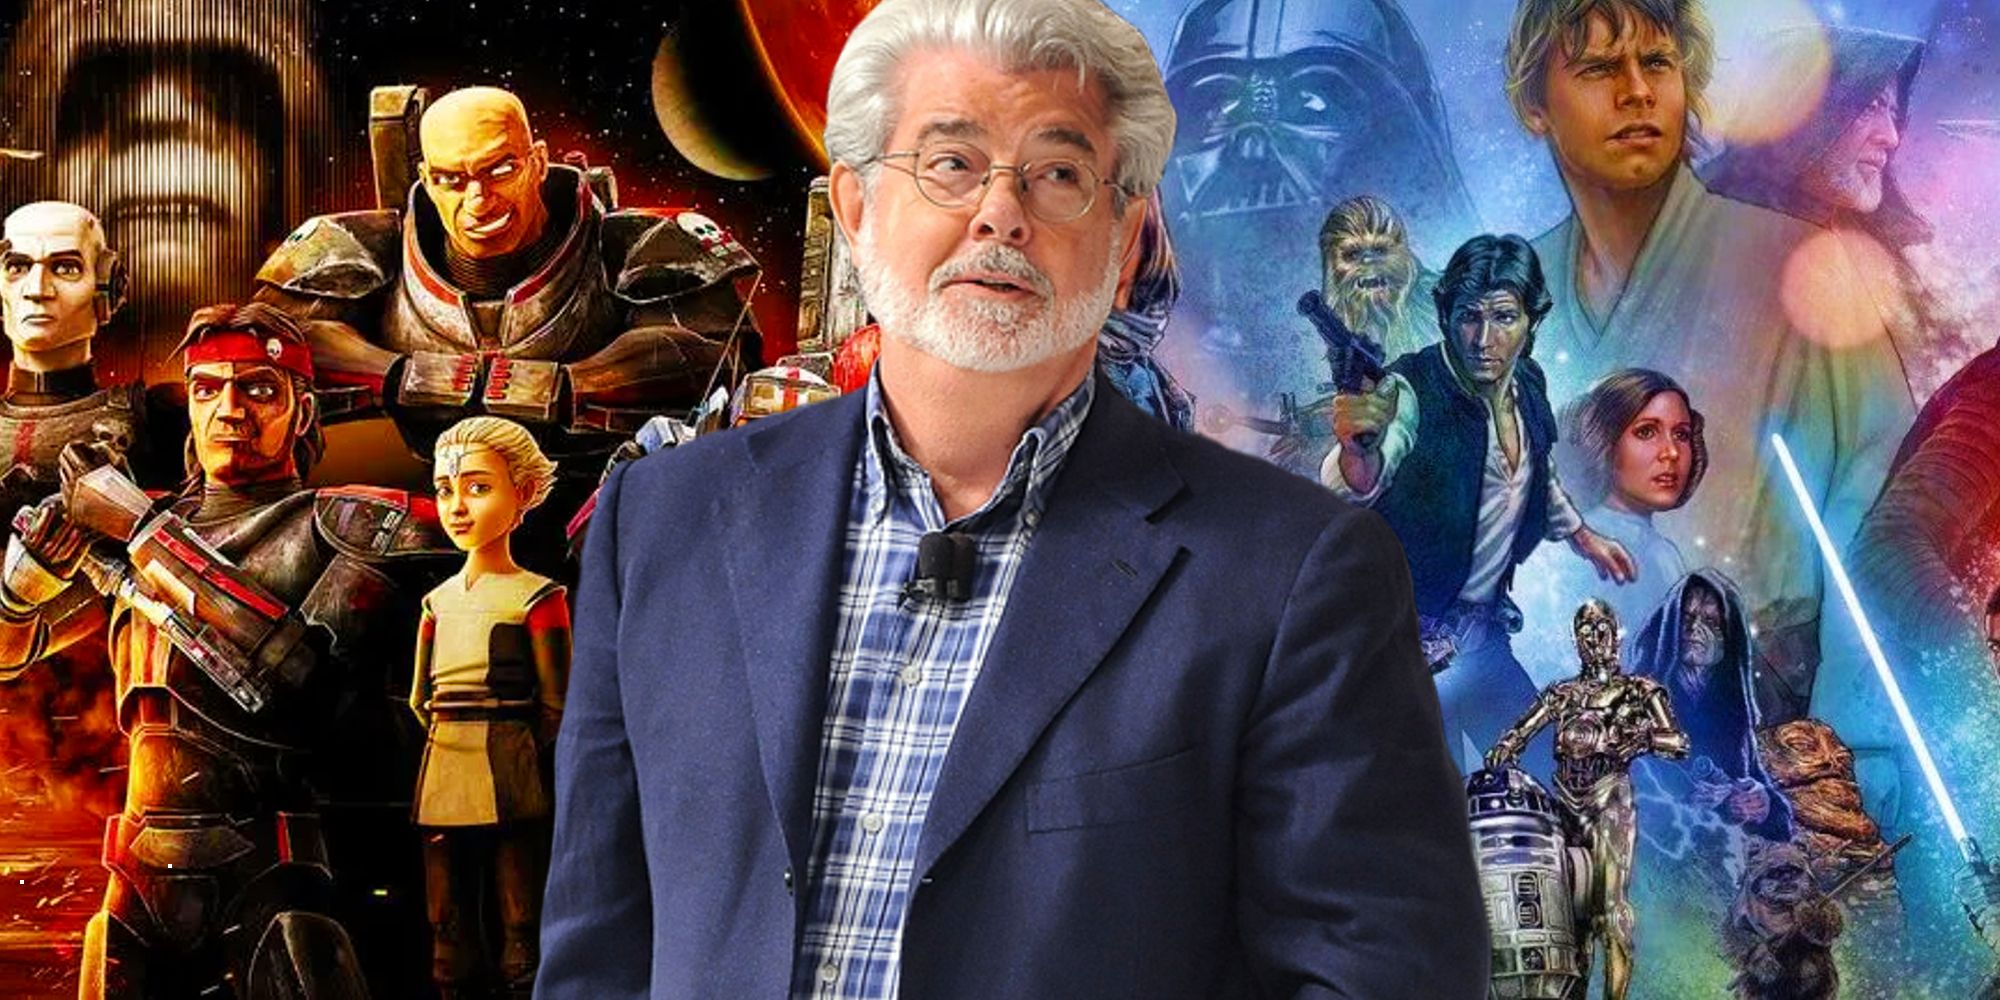 George Lucas between posters for The Bad Batch and the Skywalker Saga